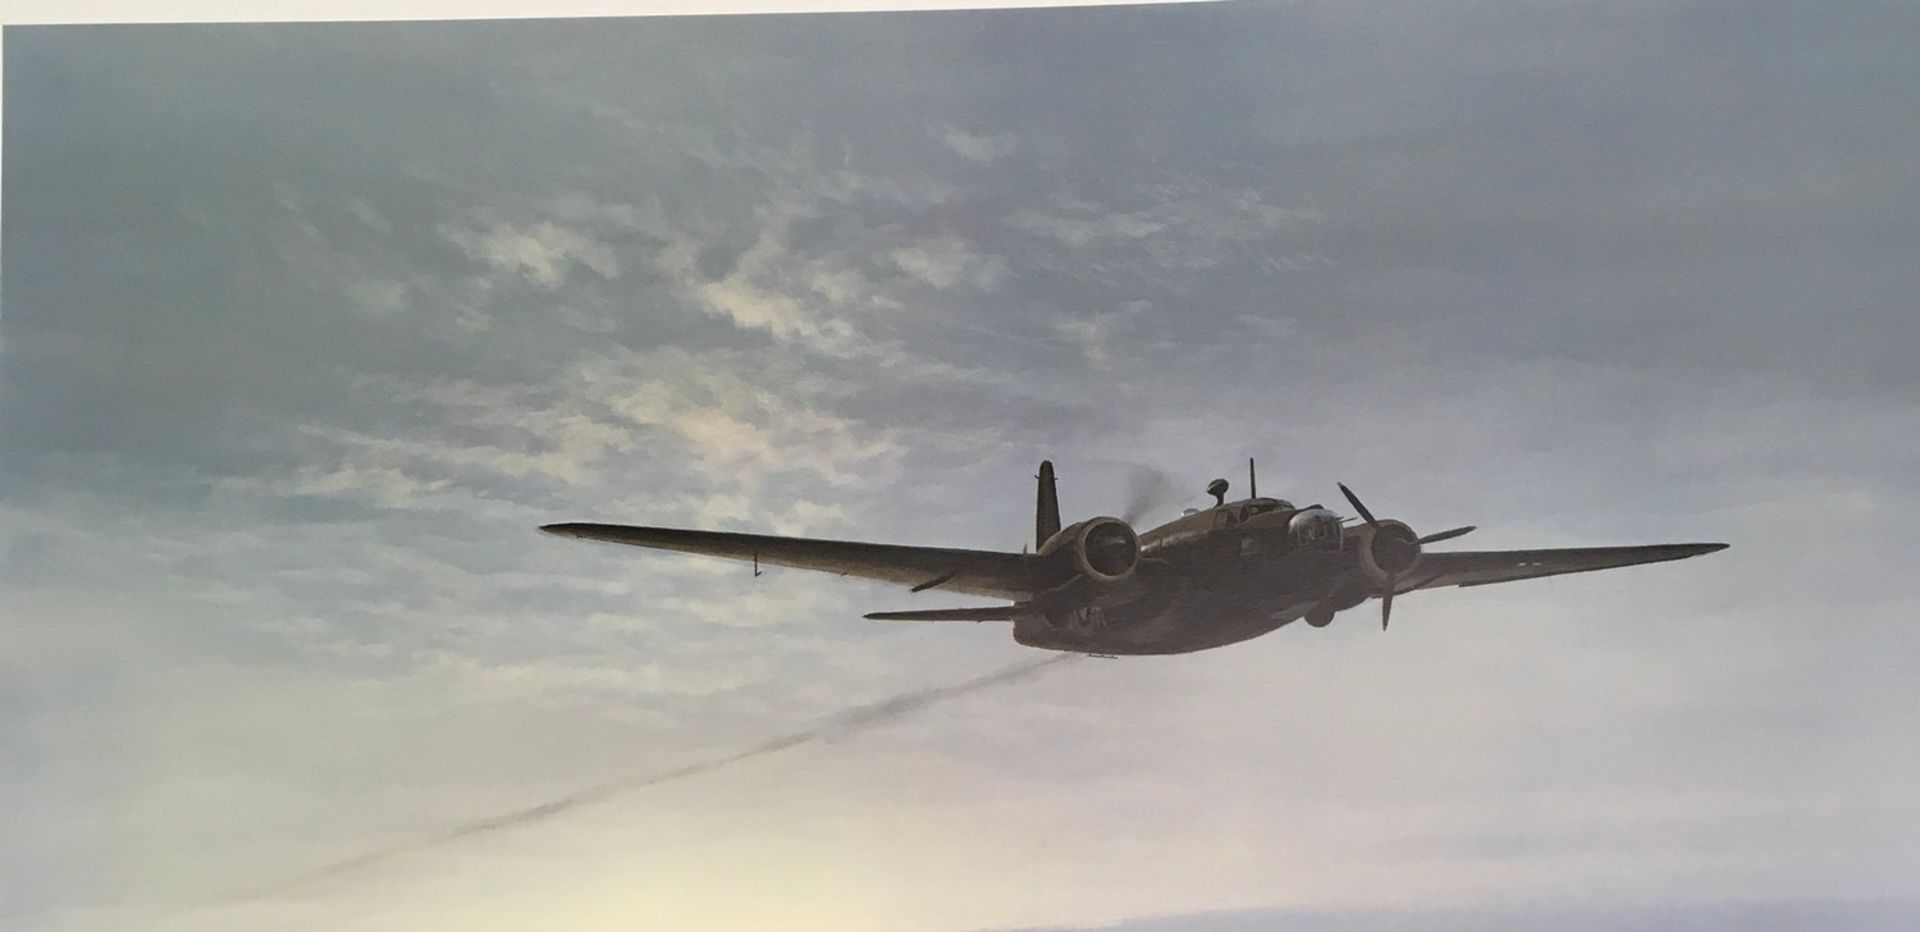 Overdue a ltd edition second WW study of RAF airplane by Gerald Coulson with indentation stamp - Image 4 of 6